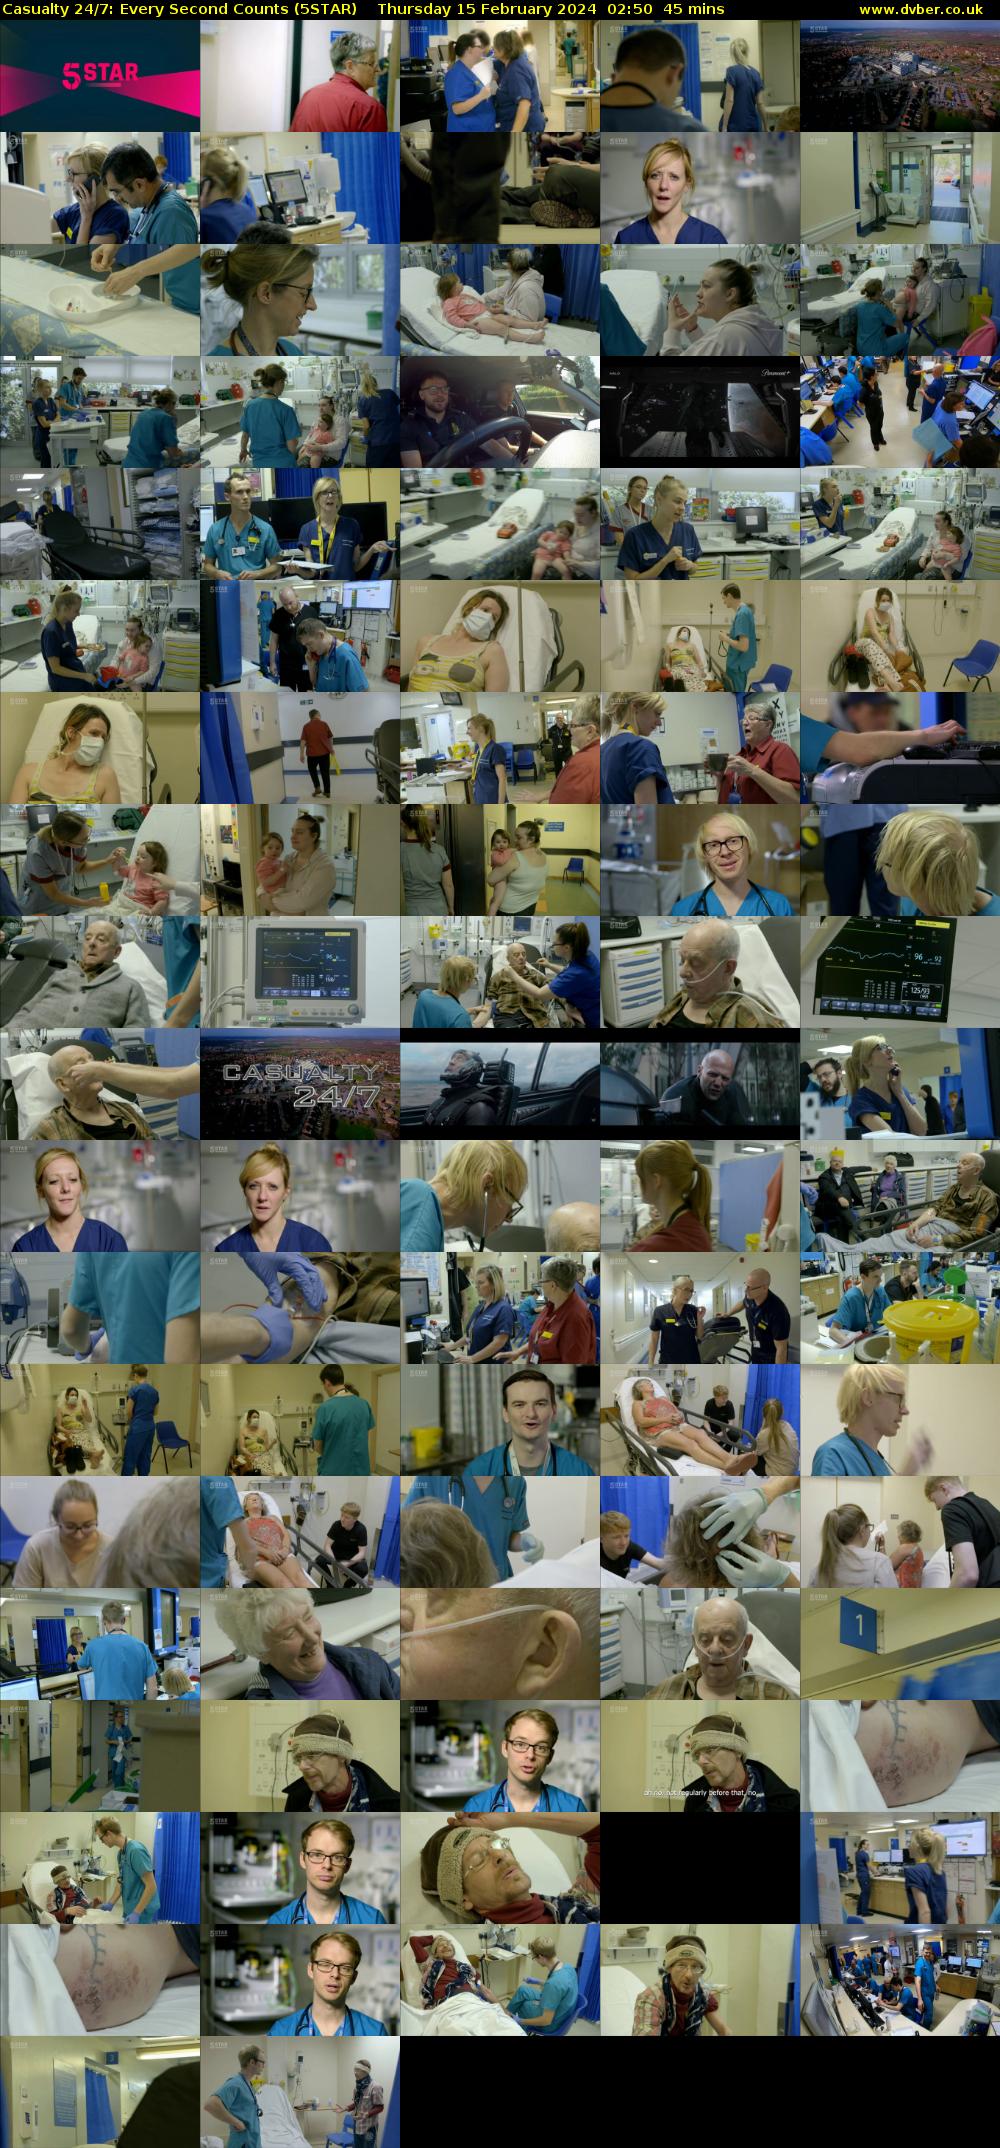 Casualty 24/7: Every Second Counts (5STAR) Thursday 15 February 2024 02:50 - 03:35